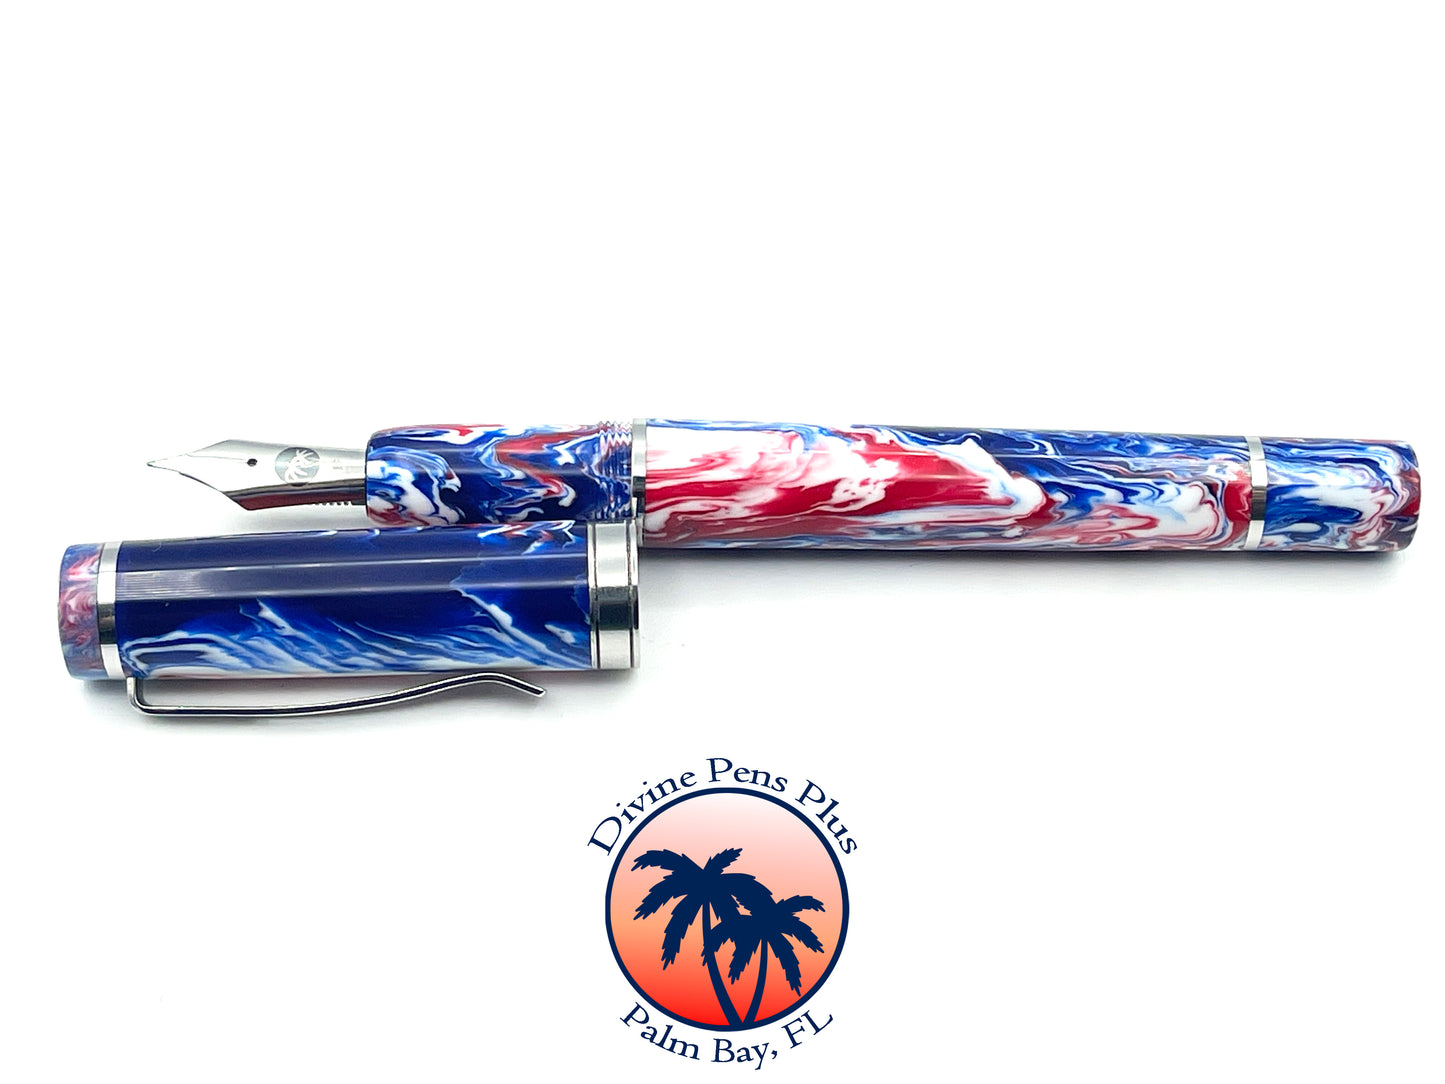 Divinus Fountain Pen - "Independence Day"